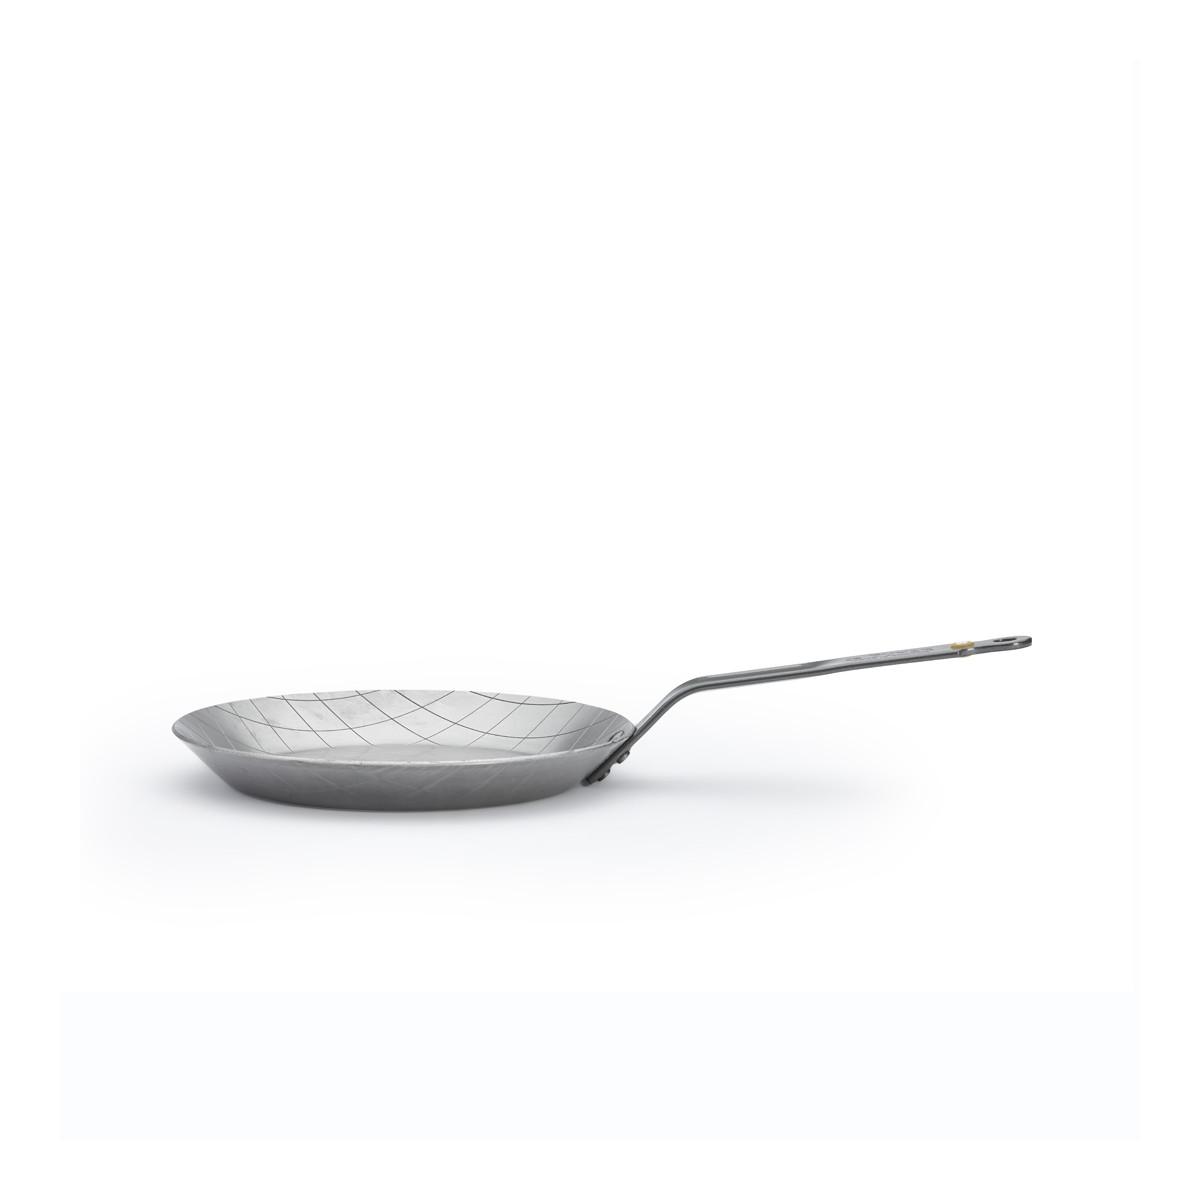 de Buyer MINERAL B Carbon Steel Fry Pan - 11” - Ideal for Searing, Sauteing  & Reheating - Naturally Nonstick - Made in France